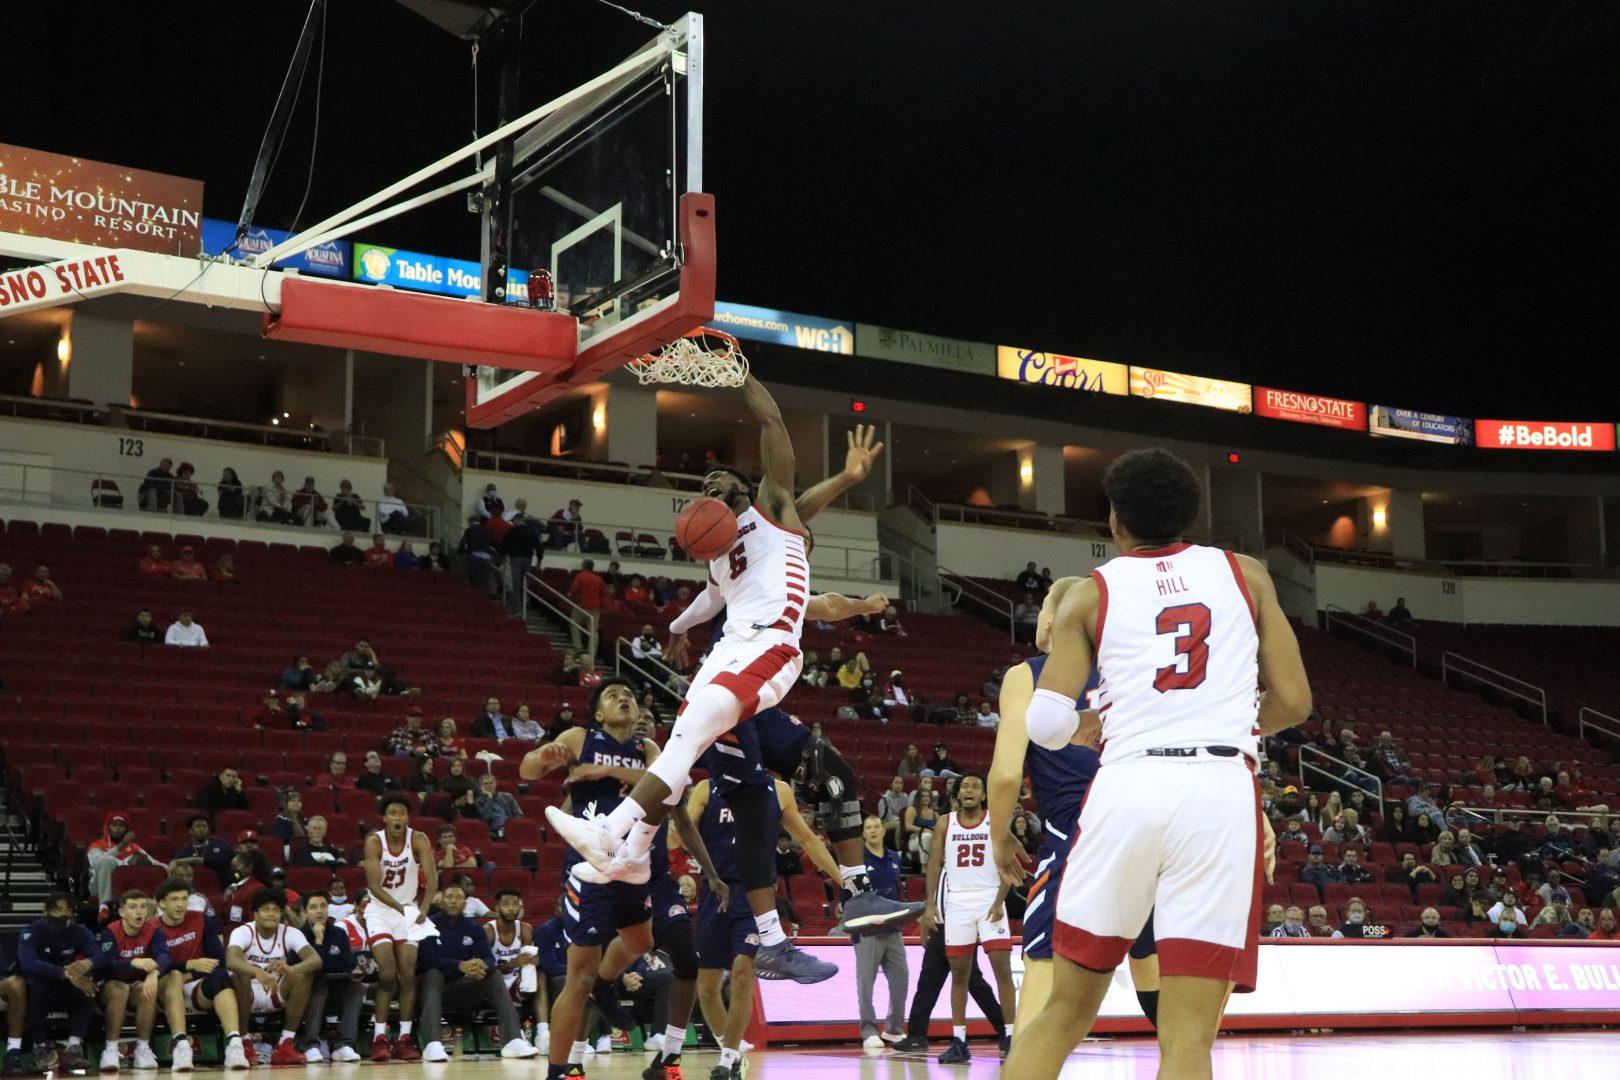 Fresno State guard Jordan Campbell dunks the ball in the second half against Fresno Pacific on Tuesday, Nov. 9, at Save Mart Center. (Melina Kazanjian/The Collegian)